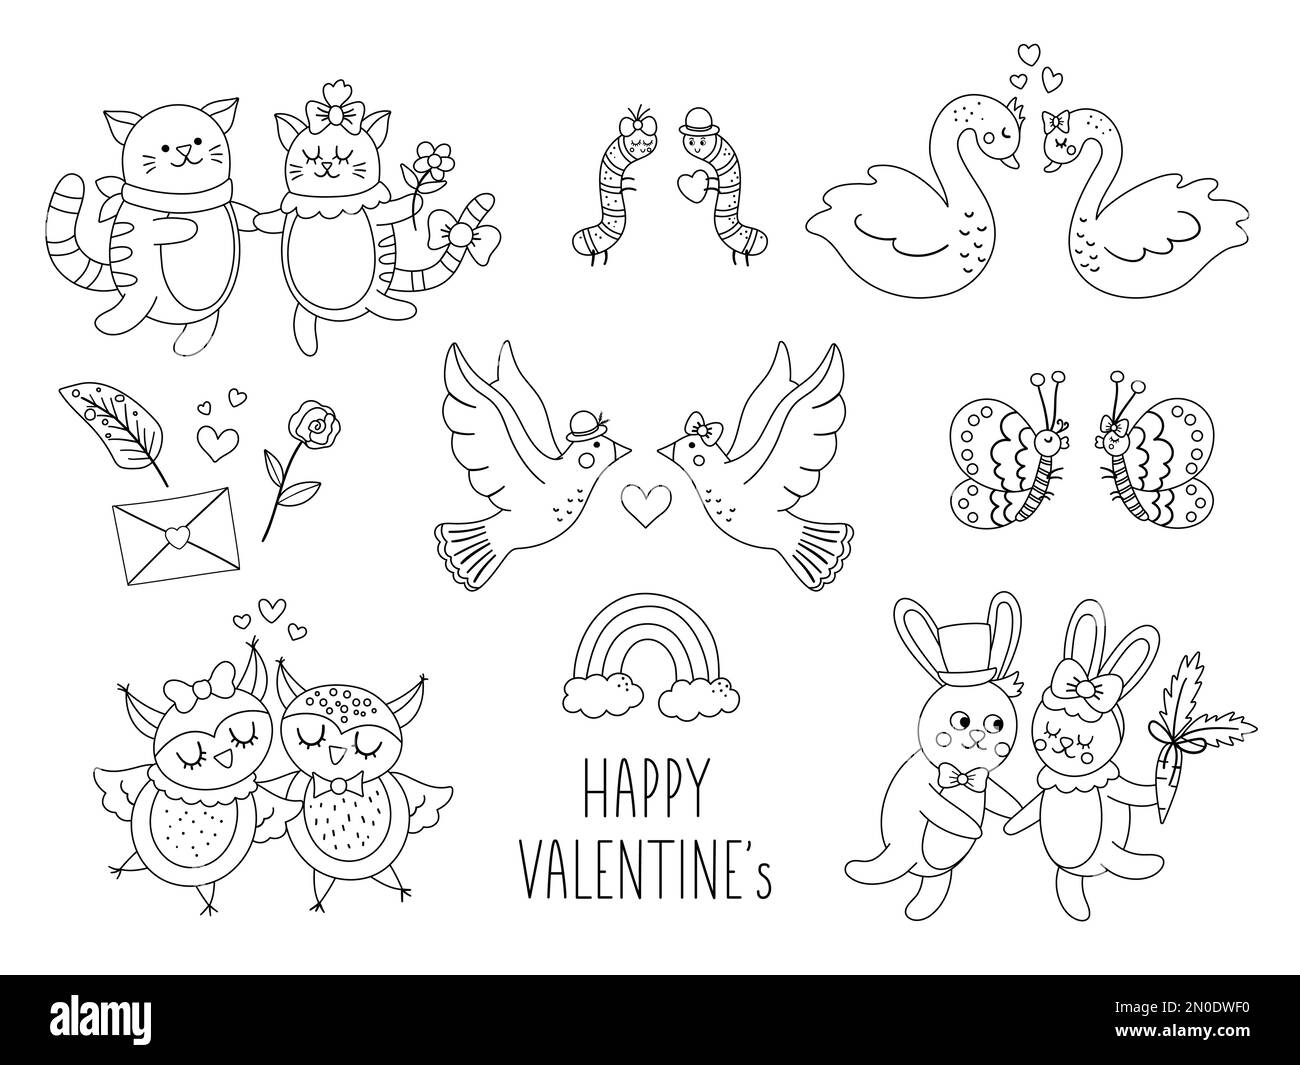 Vector collection of cute black and white animal pairs. Loving couples illustration. Love relationship or family outline concepts set. Hugging swans, Stock Vector